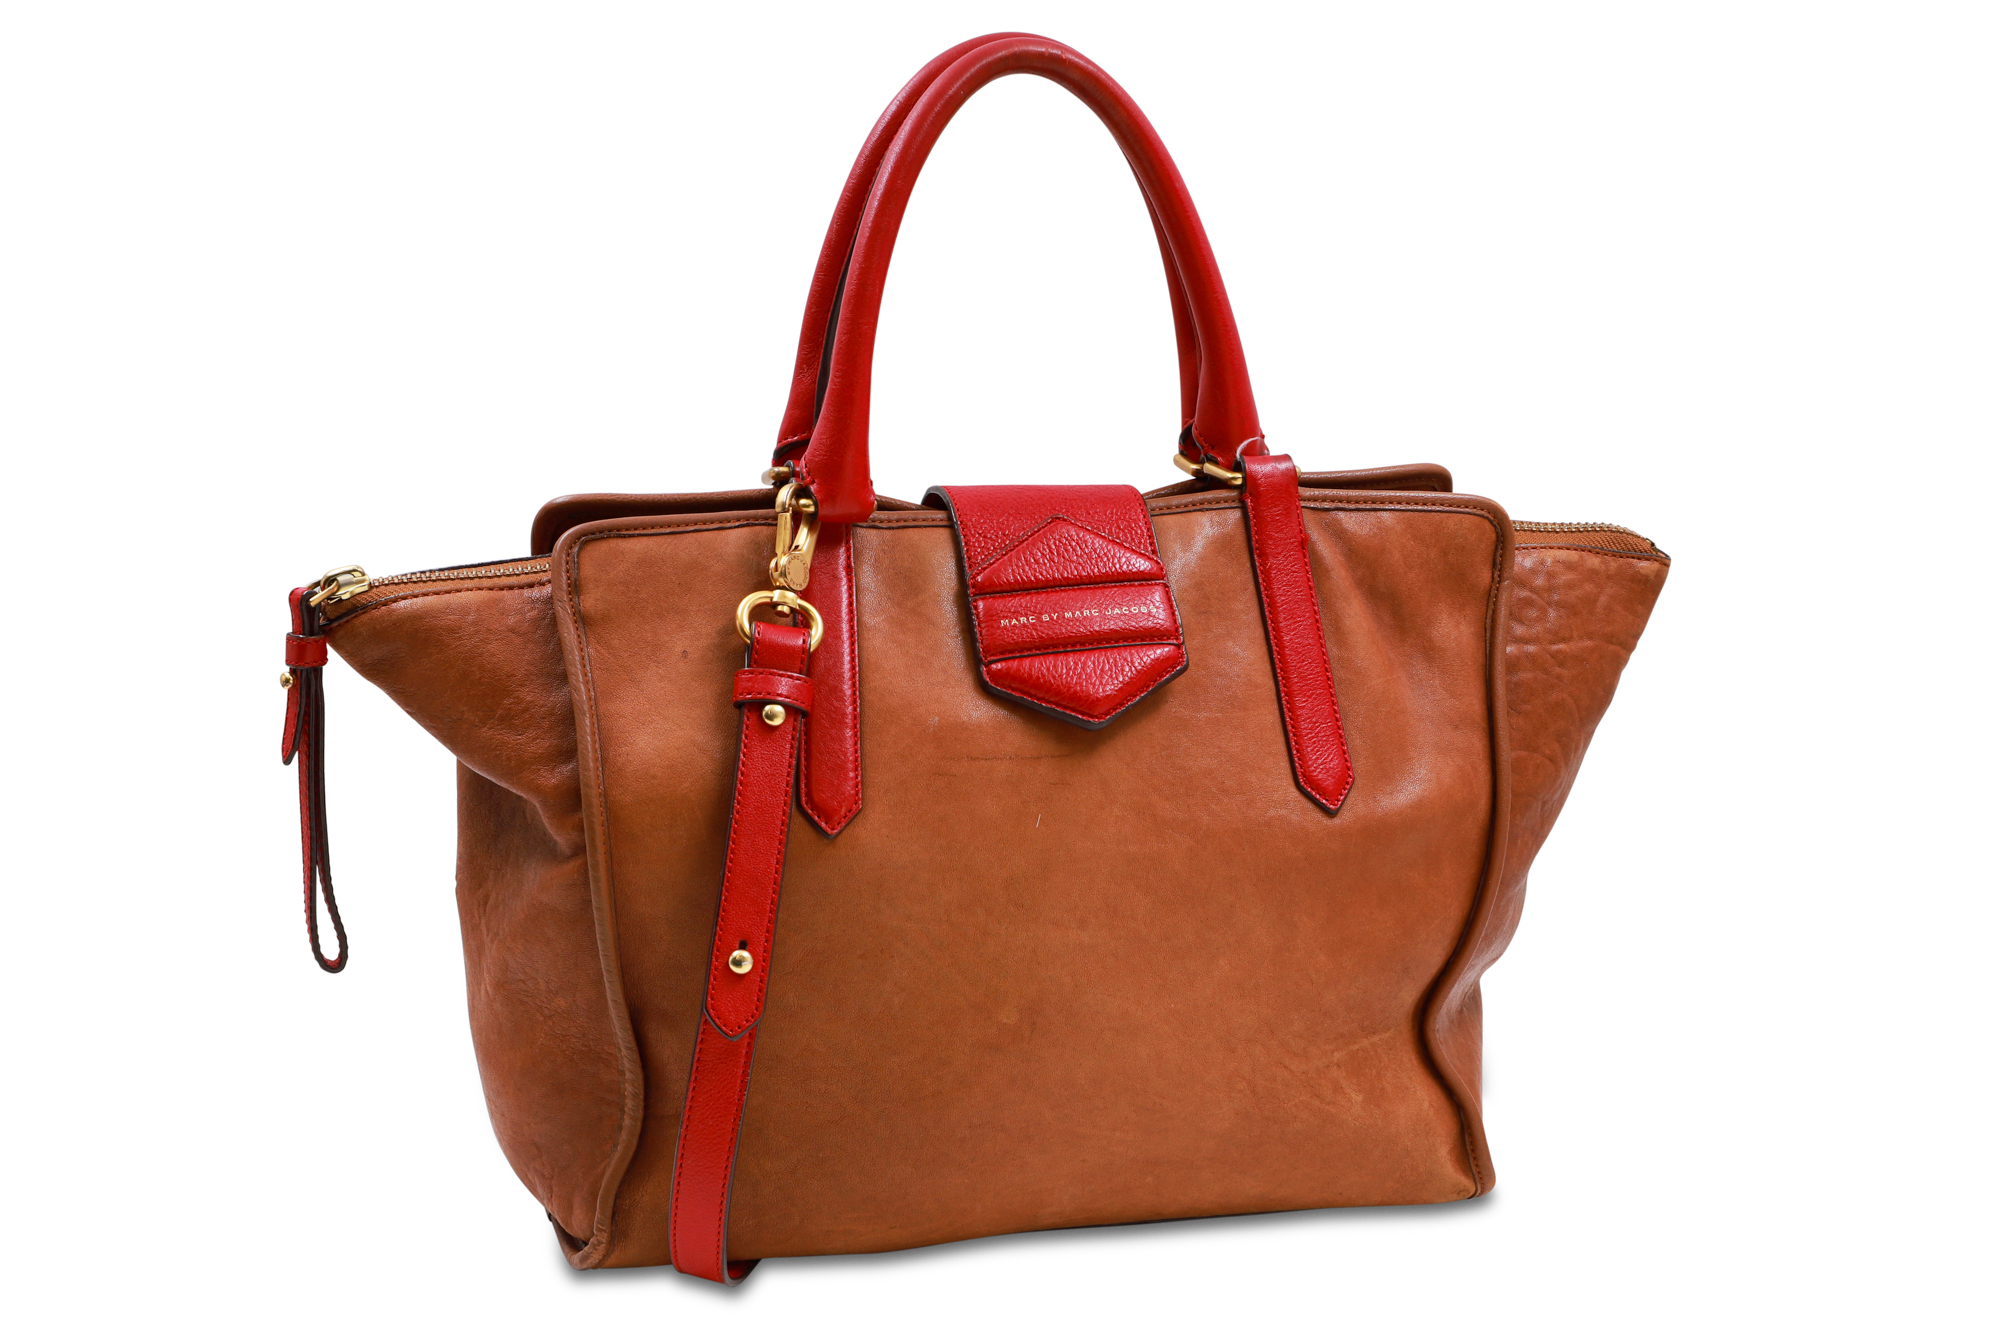 A MARC JACOBS TOP HANDLE HANDBAG, the tan leather handbag with red leather accents, gold colour